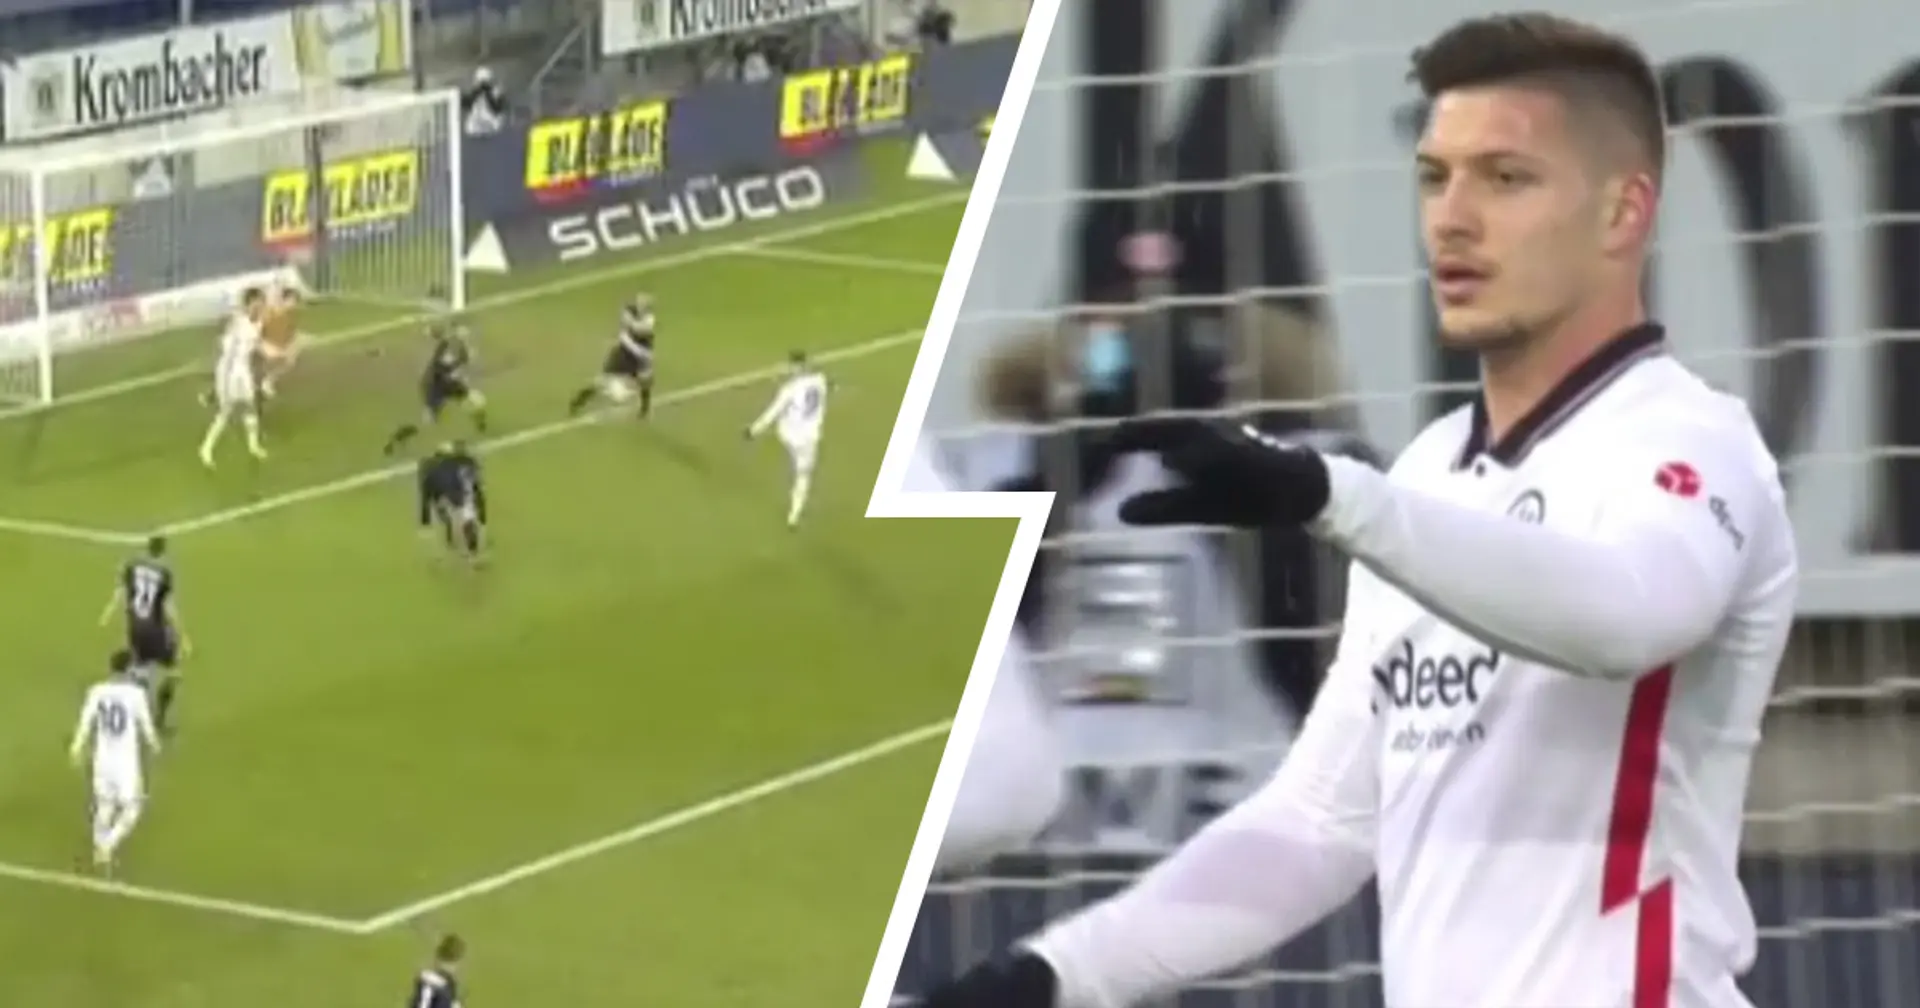 He strikes again: Luka Jovic scores another goal for Frankfurt 9 mins after being subbed on